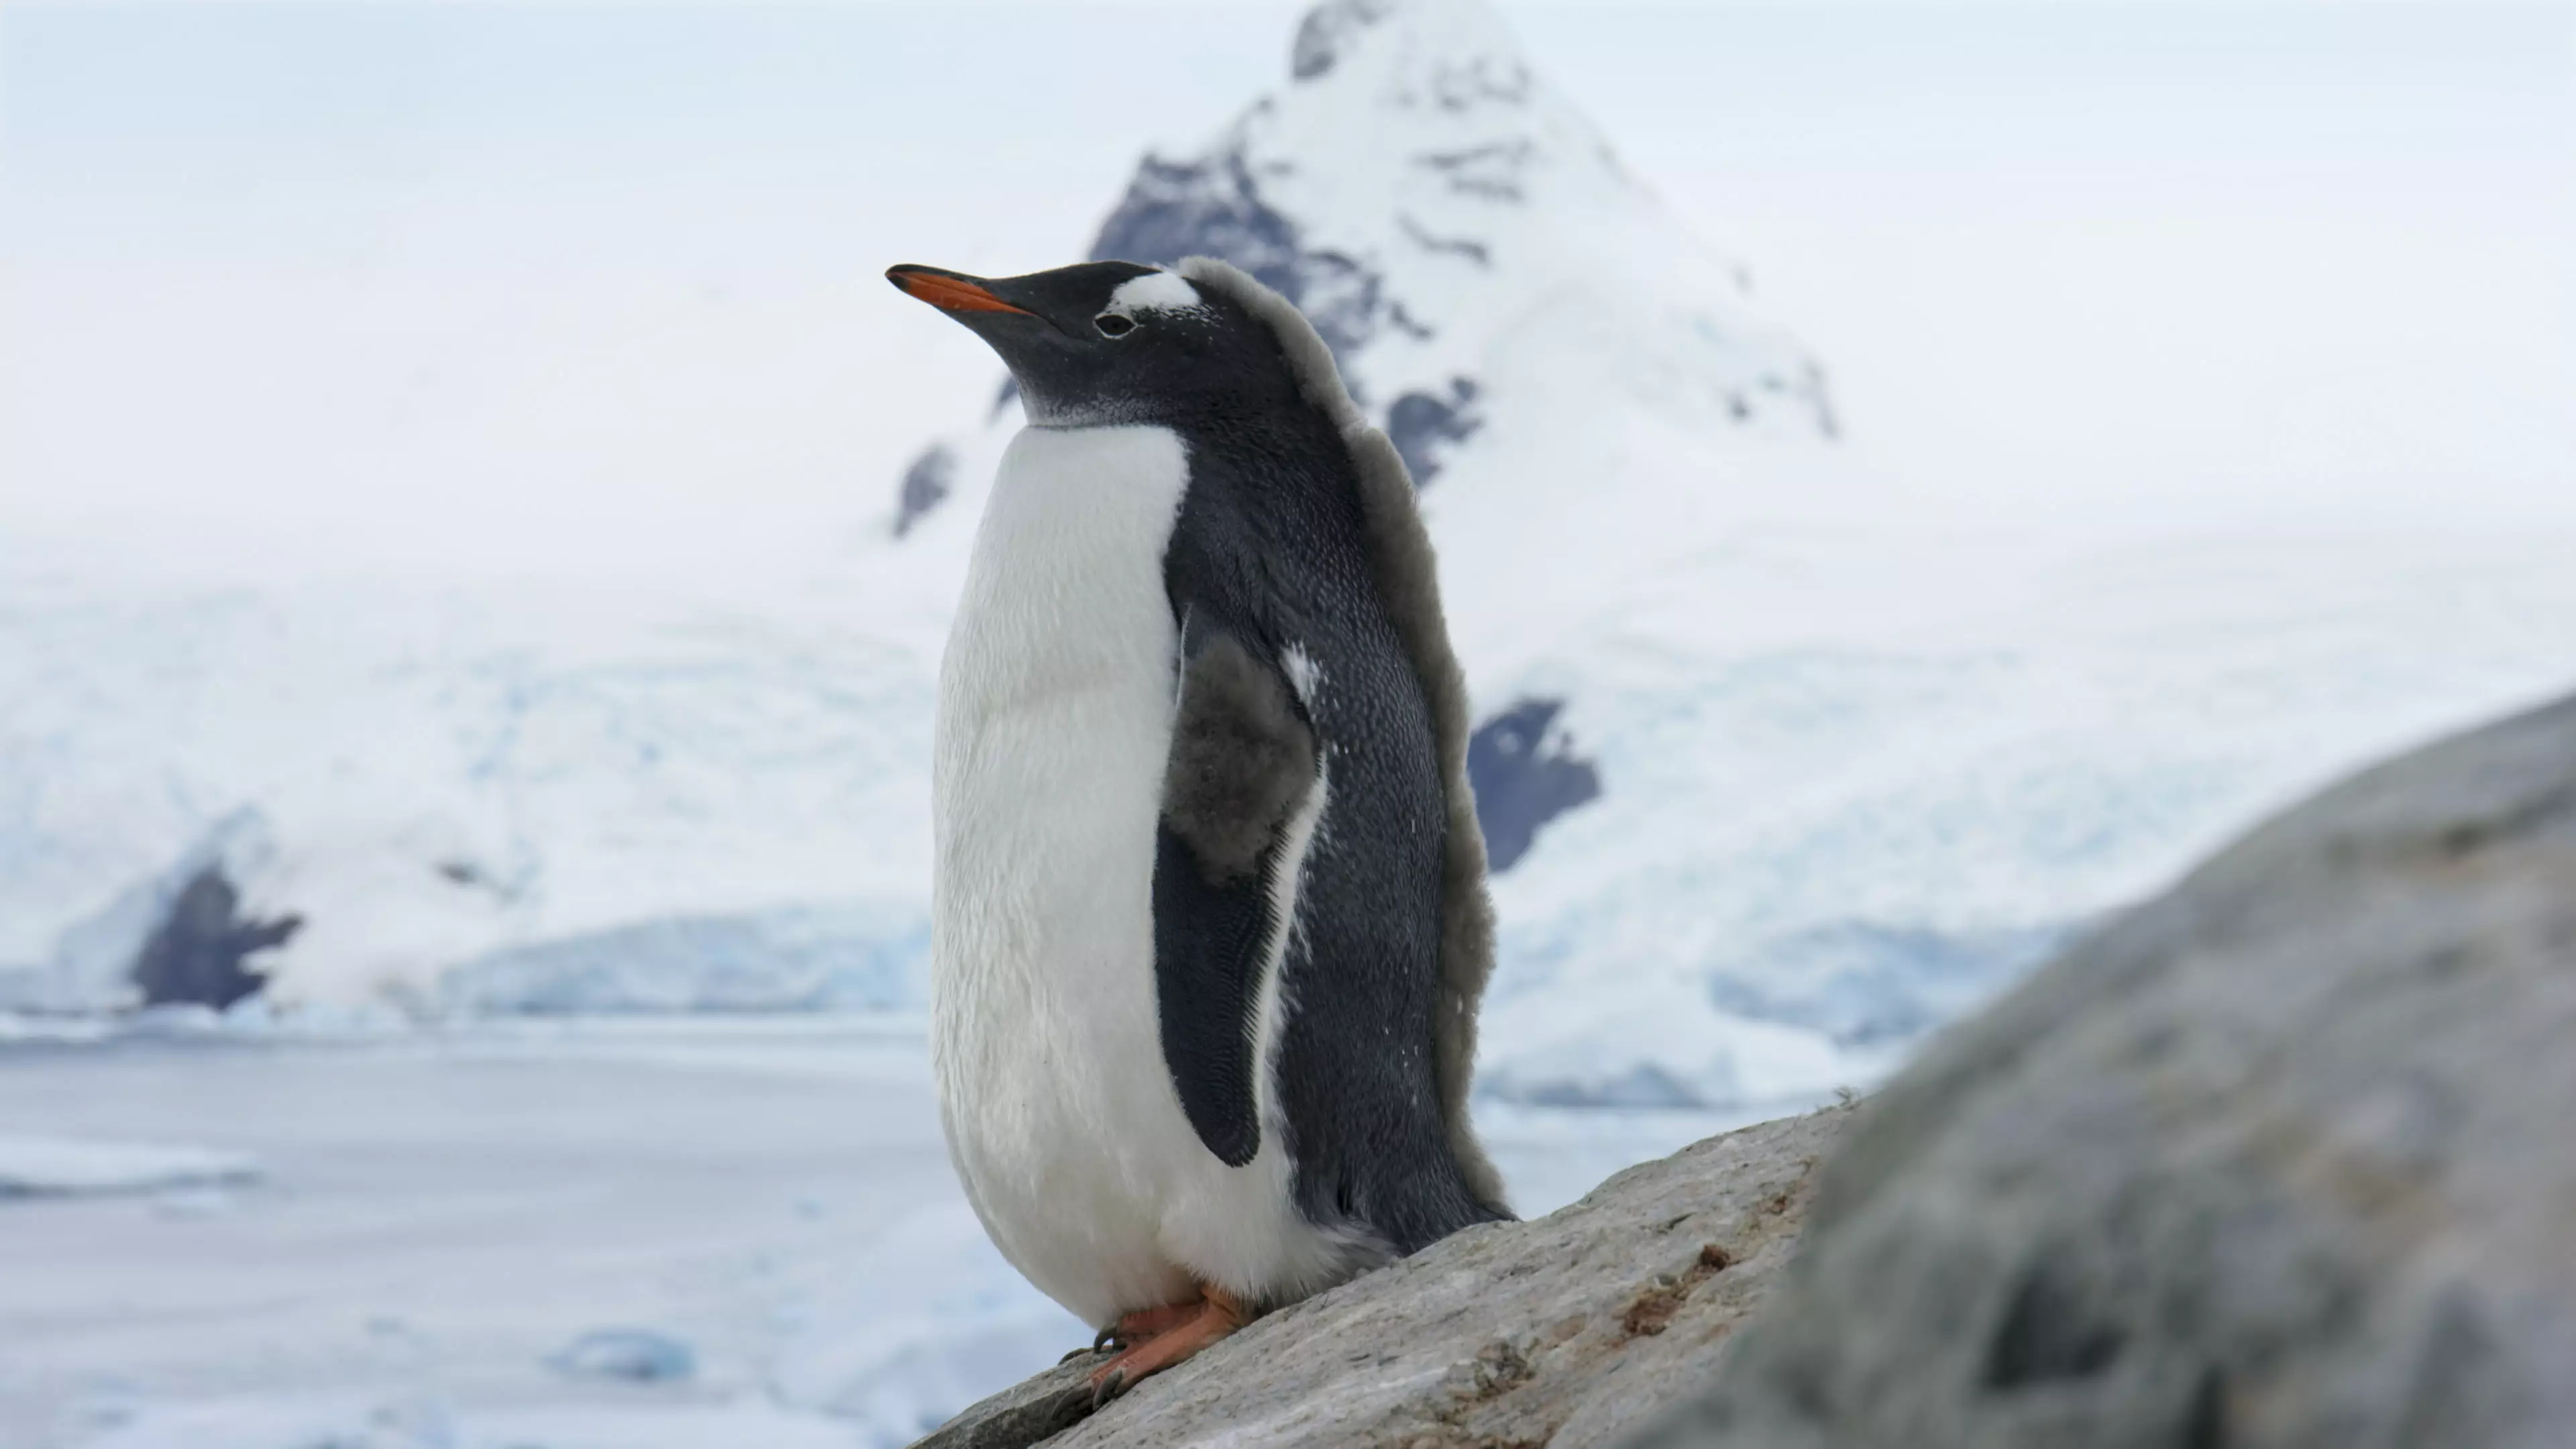 A young gentoo penguin in Antarctica will be shown in episode one. (